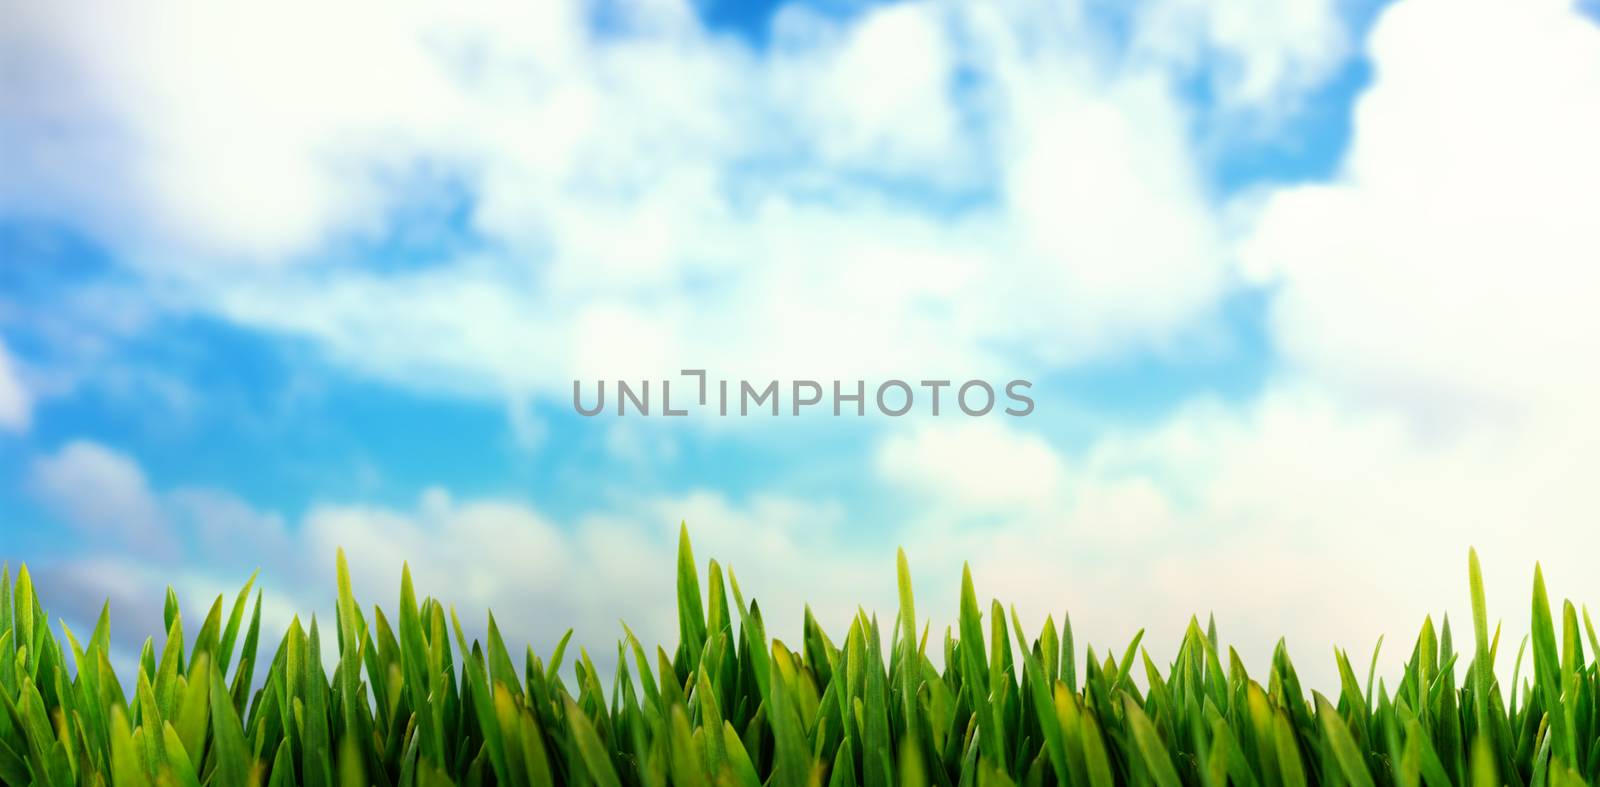 Grass growing outdoors against blue sky with white clouds